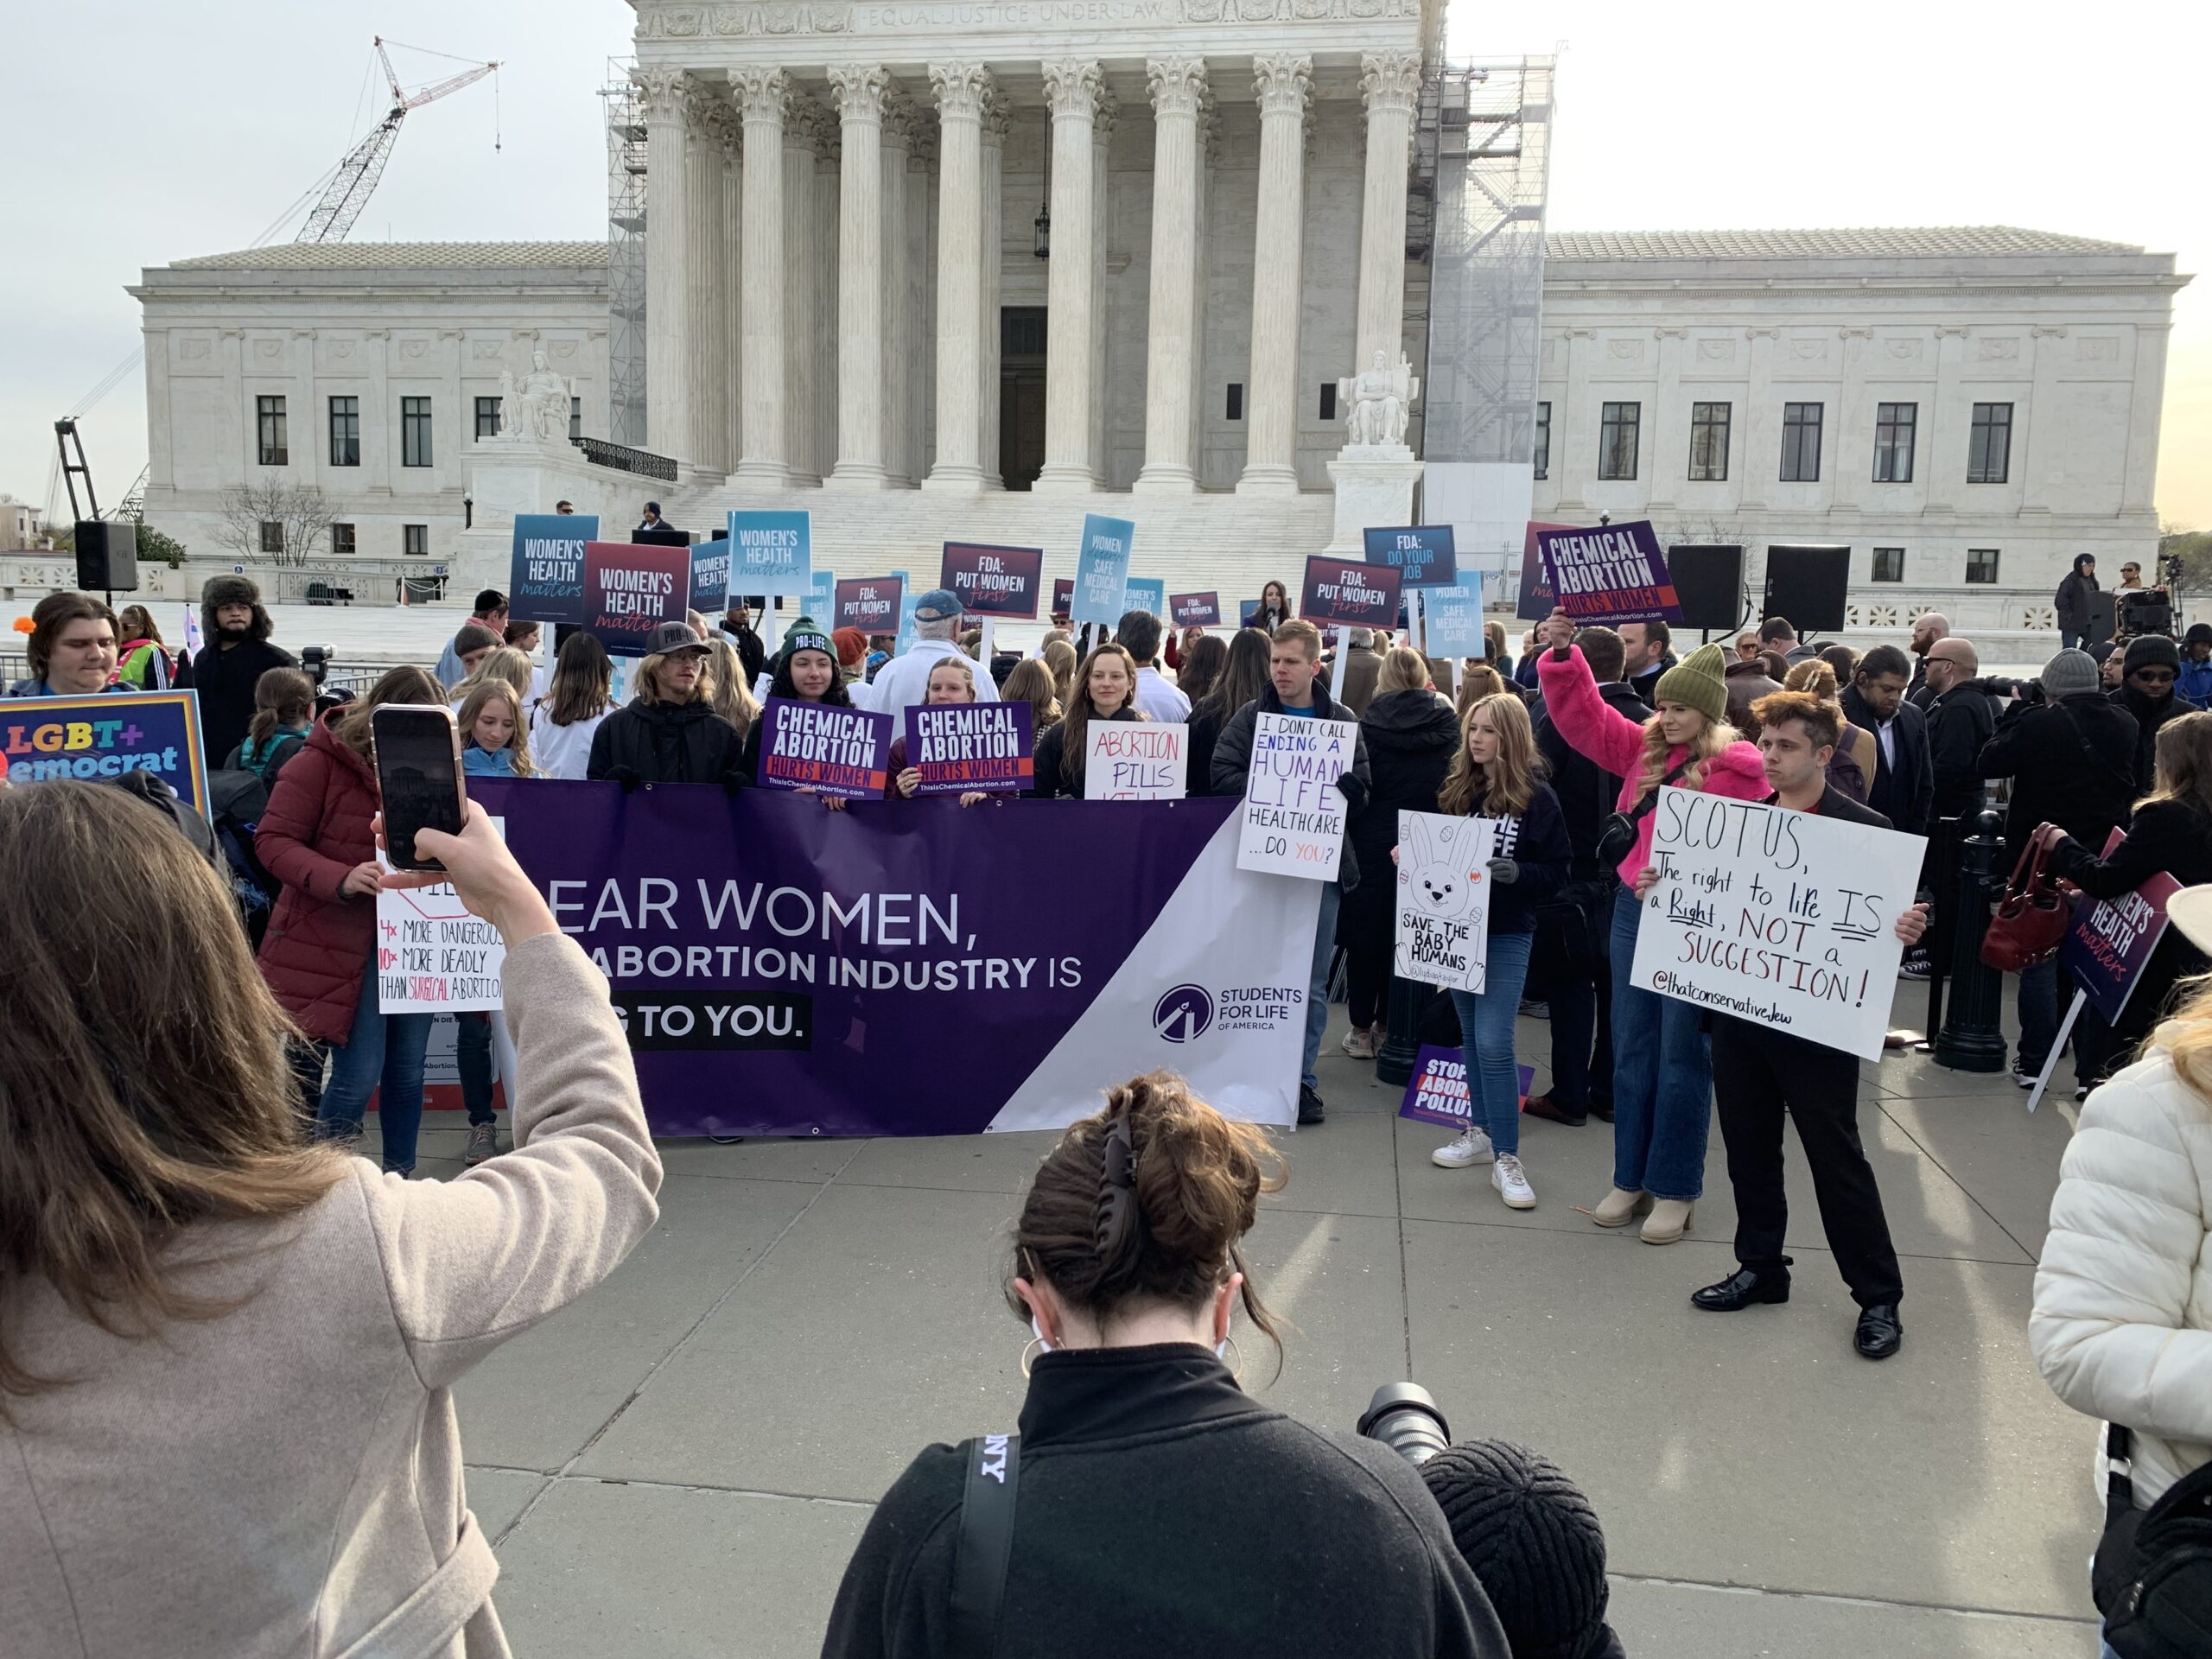 Doctors rally at scotus against fda’s ‘reckless’ abandonment of high-risk abortion drug